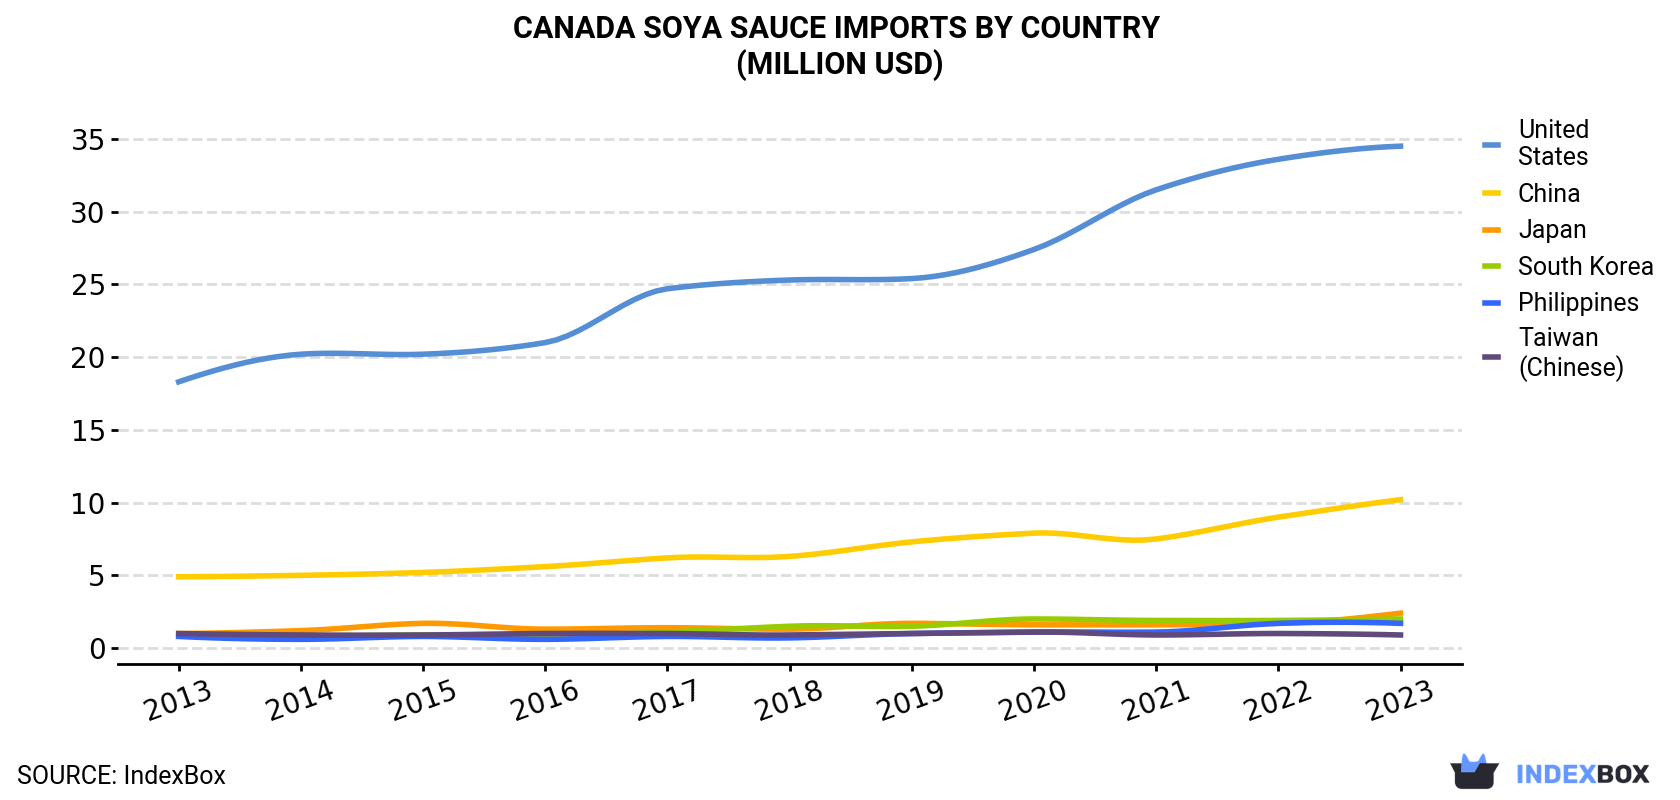 Canada Soya Sauce Imports By Country (Million USD)